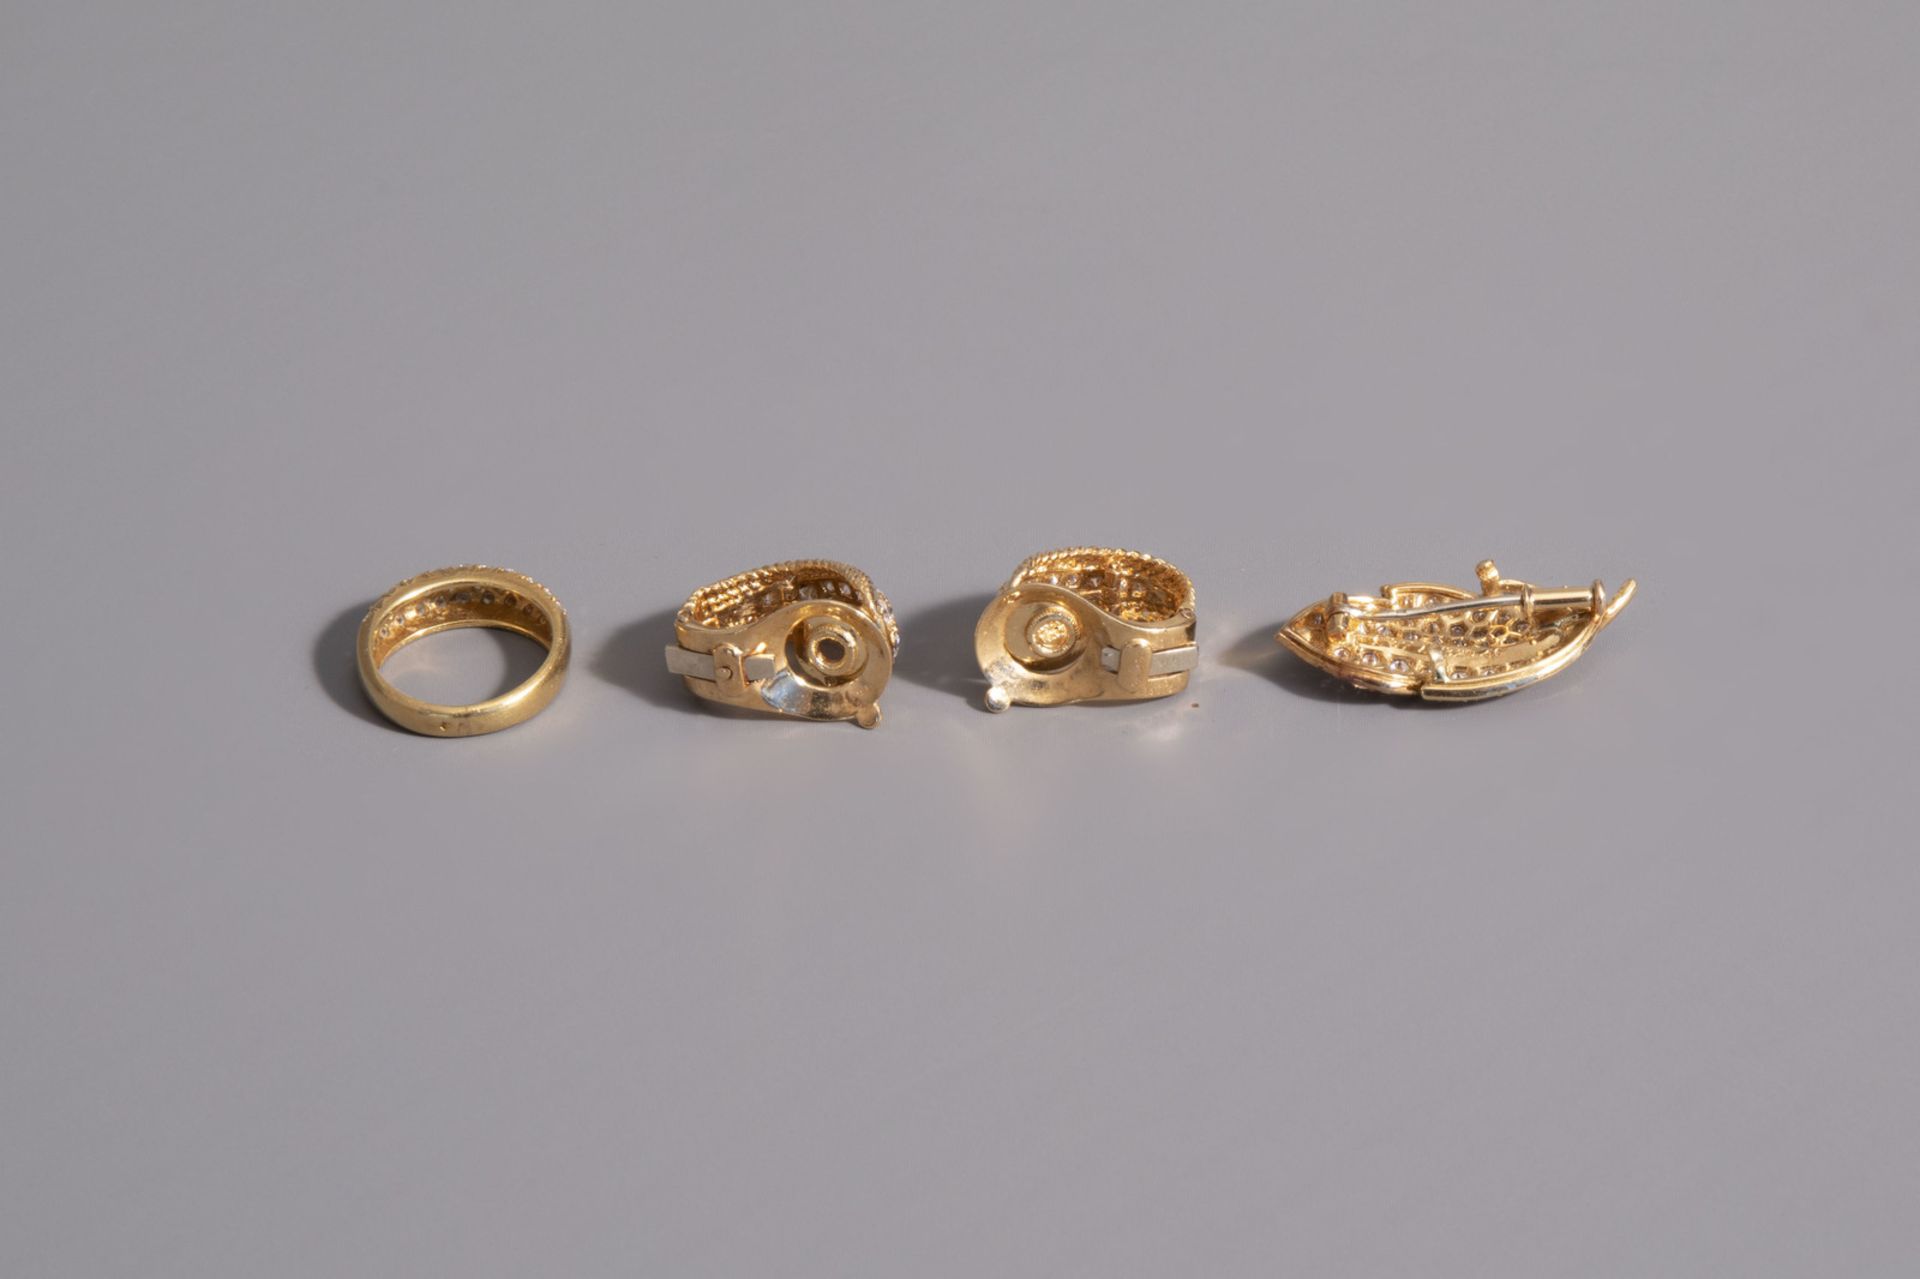 An 18 carat yellow gold set with diamonds consisting of a ring, a pair of earrings and a brooch, 20t - Image 3 of 3